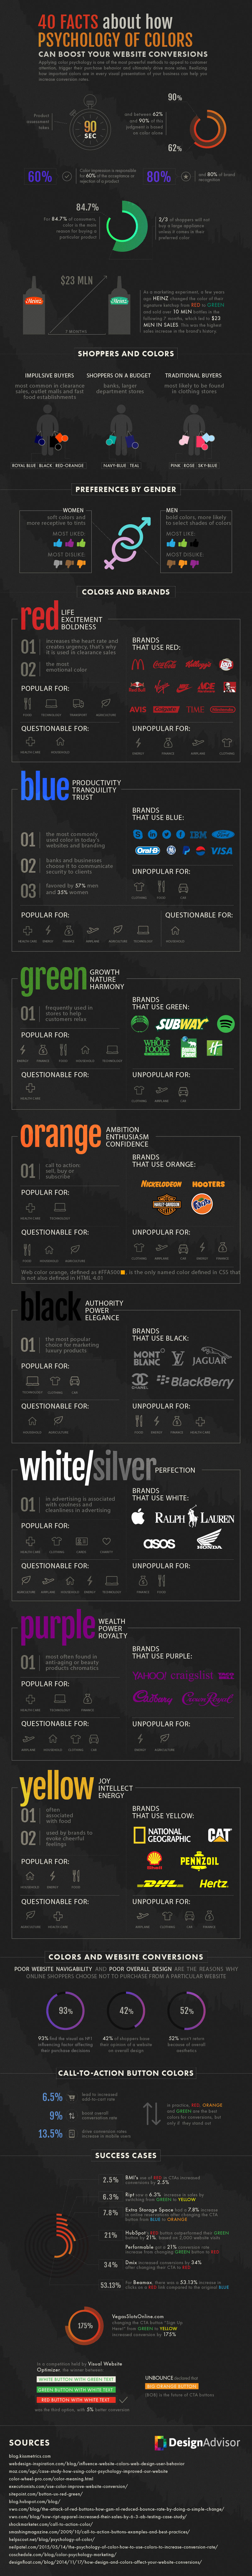 40 Facts How Psychology of Colour Can Boost Website Conversions (Infographic)